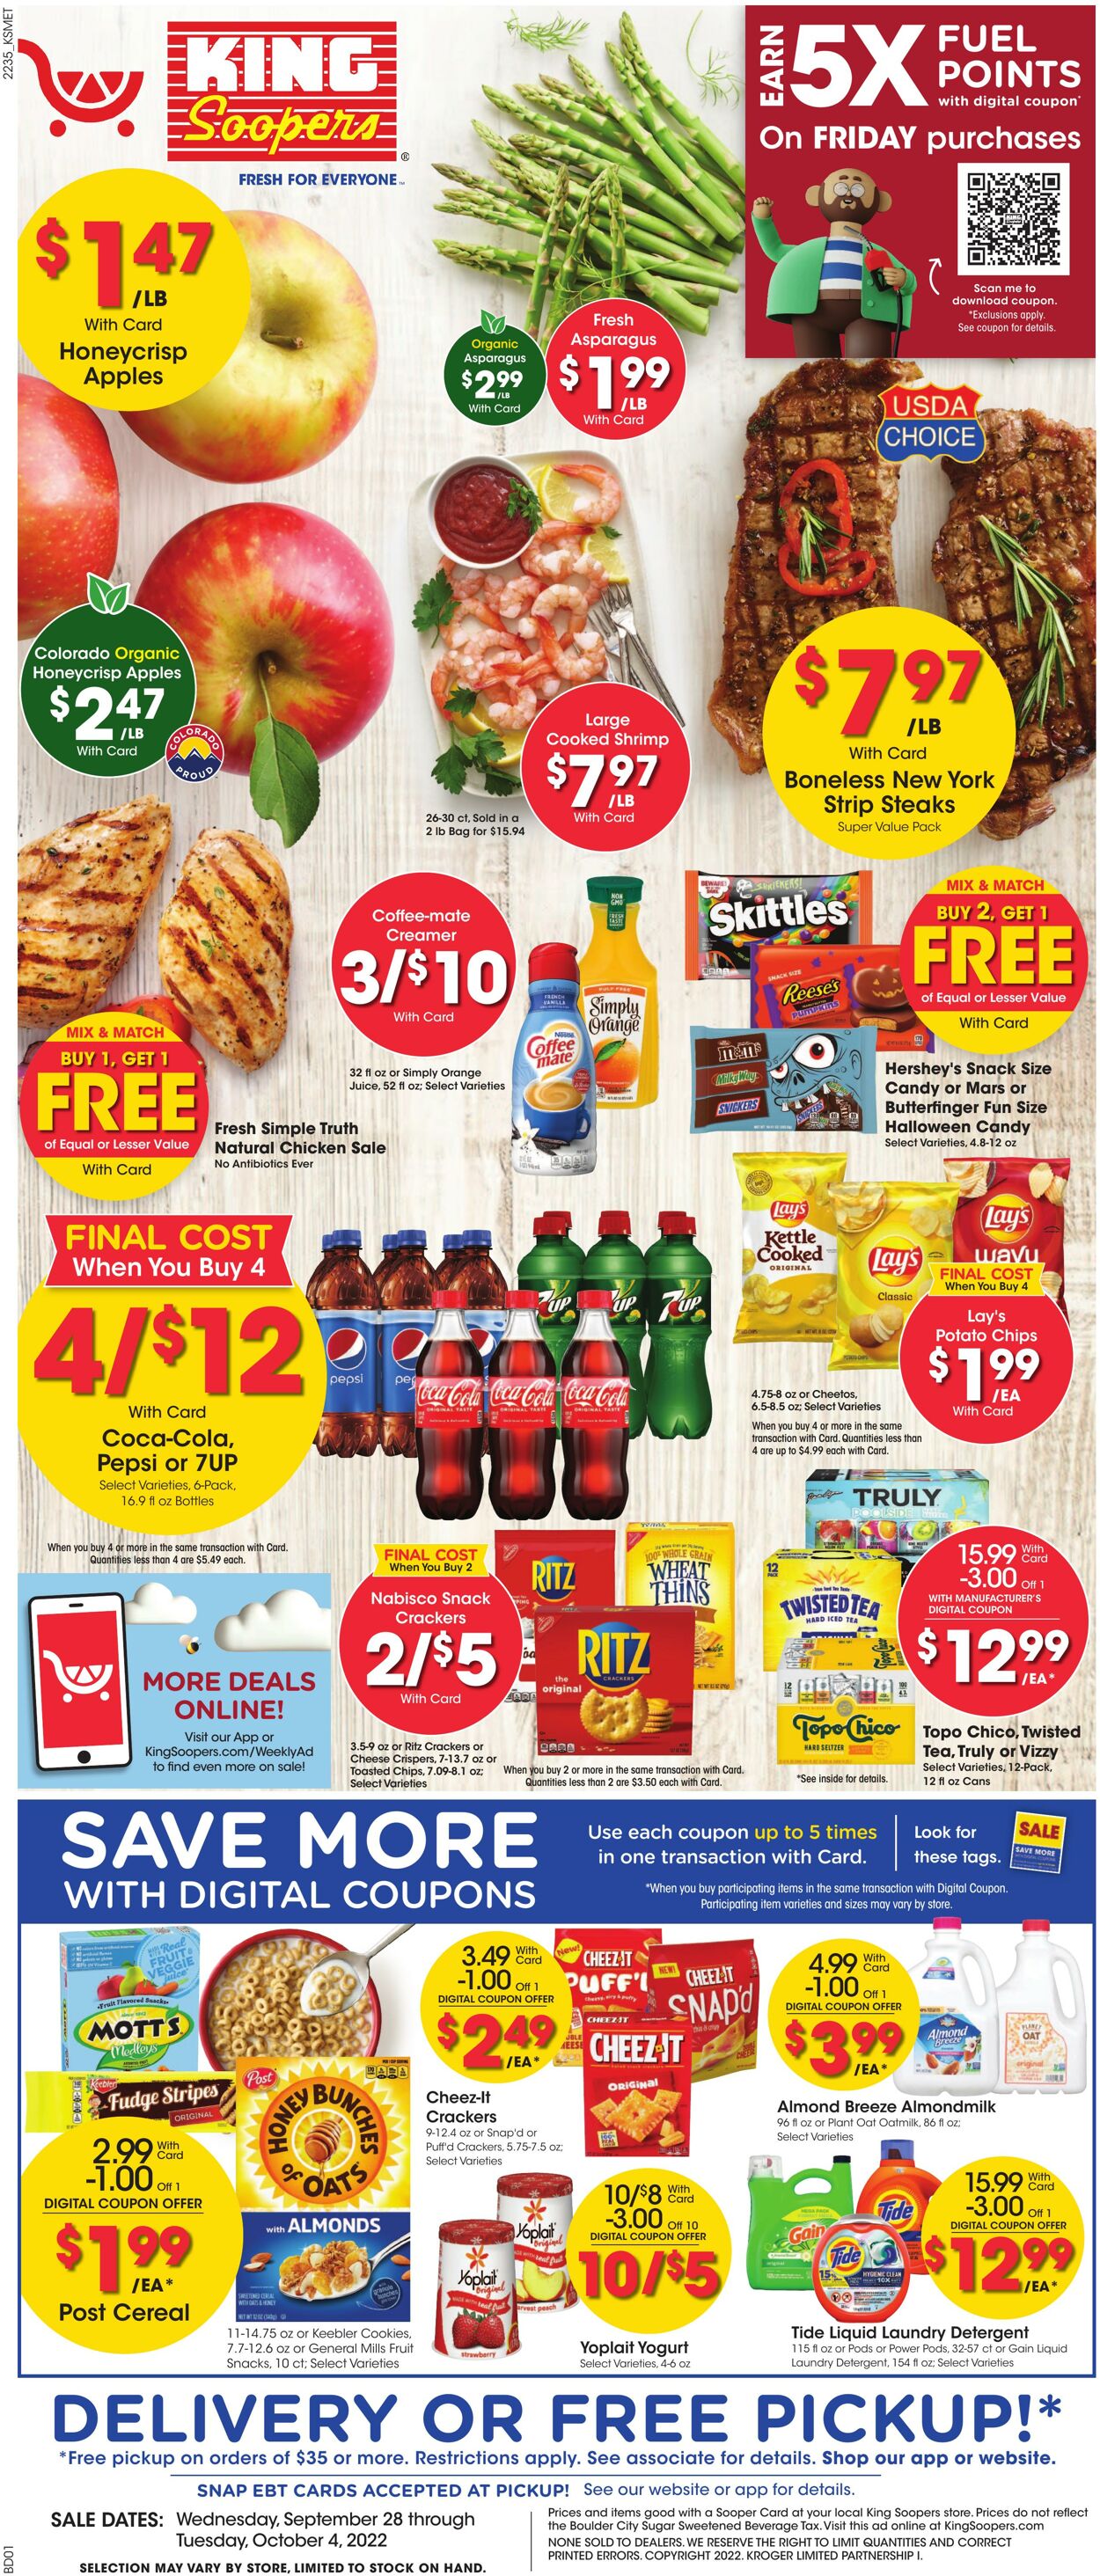 King Soopers Promotional weekly ads